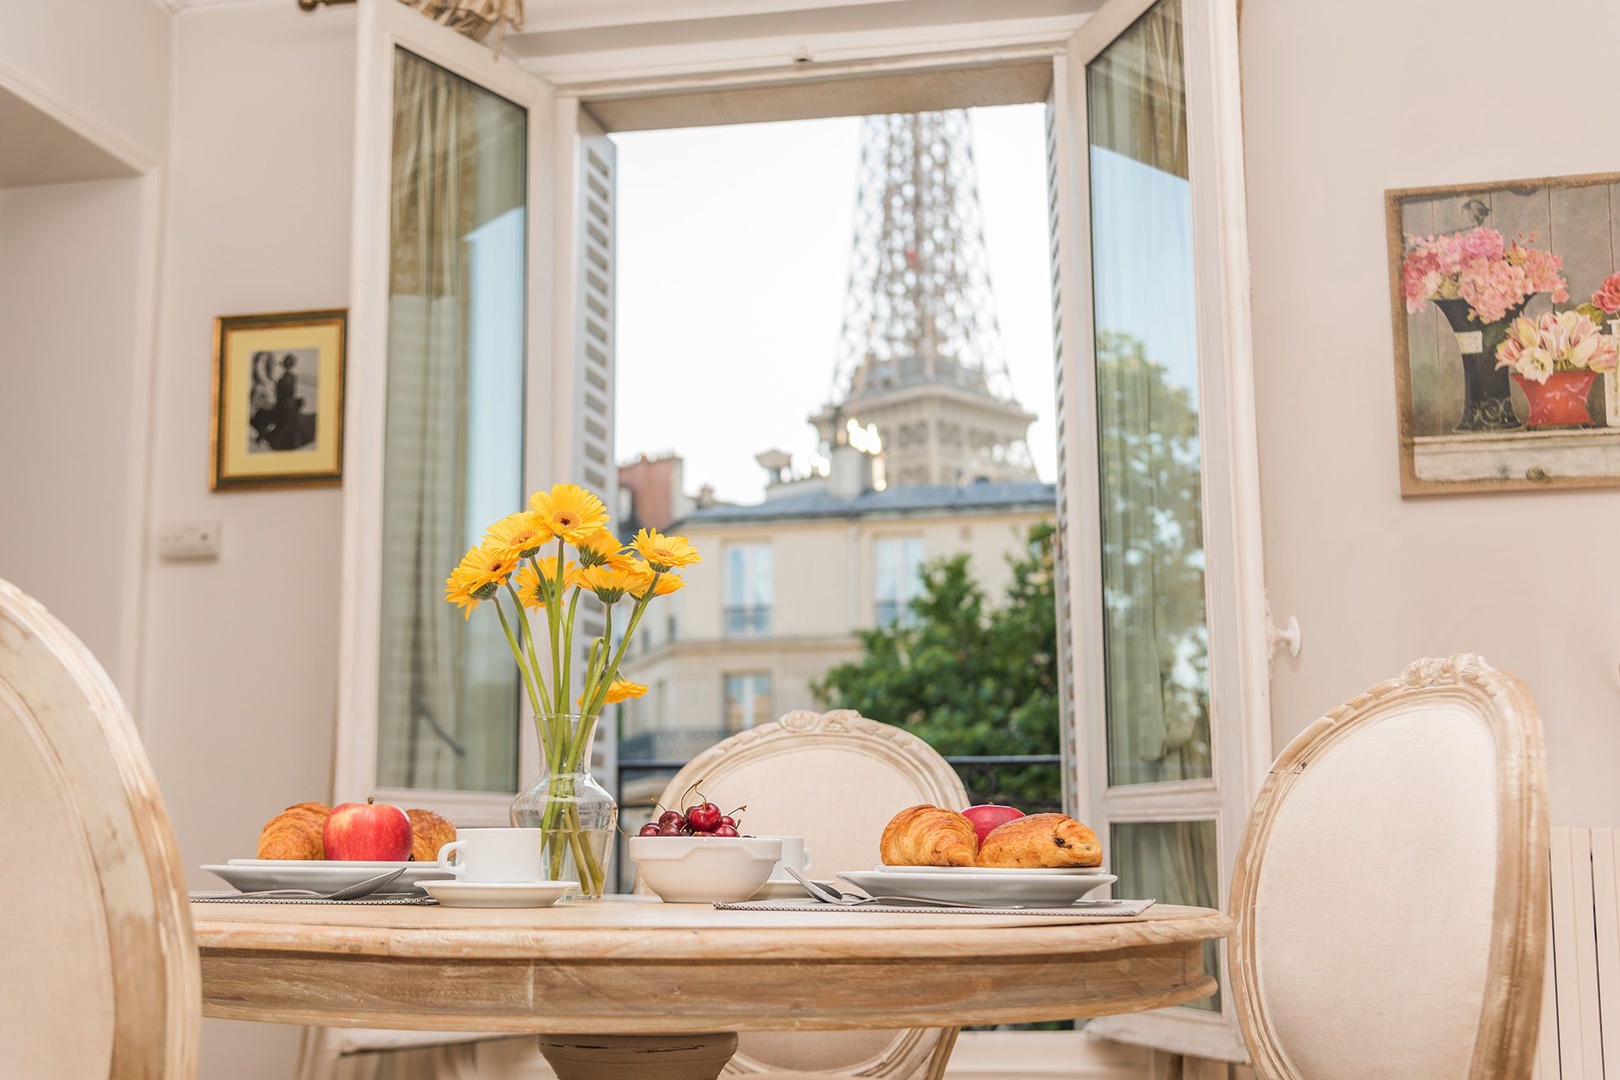 Enjoy a Parisian breakfast with a view in your apartment.